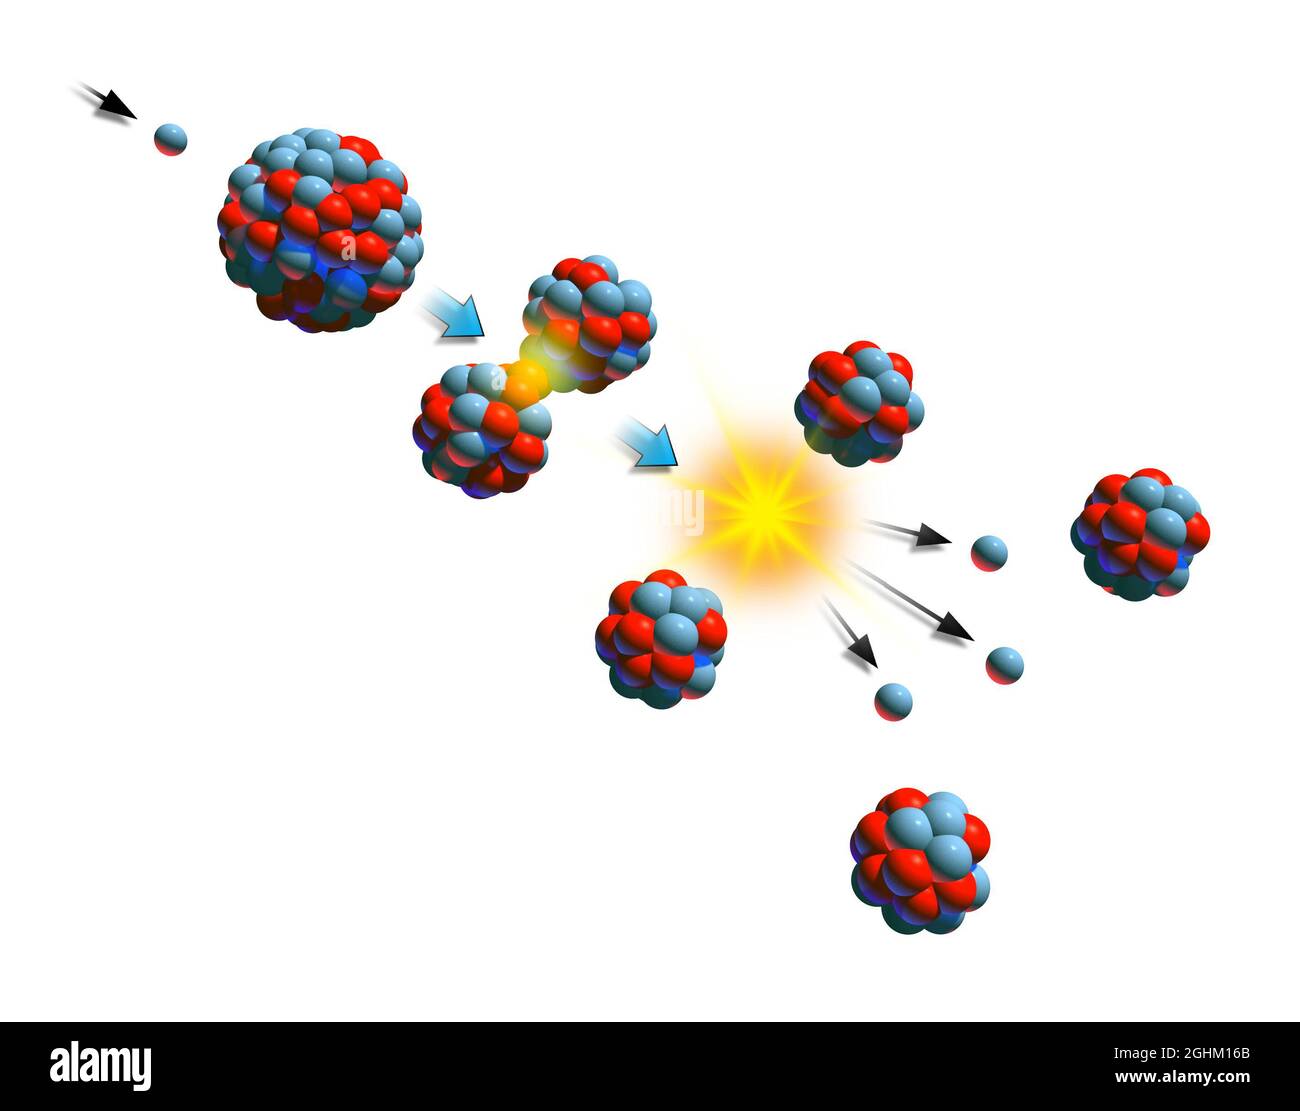 Nuclear fission chain reaction. Digital illustration. Stock Photo